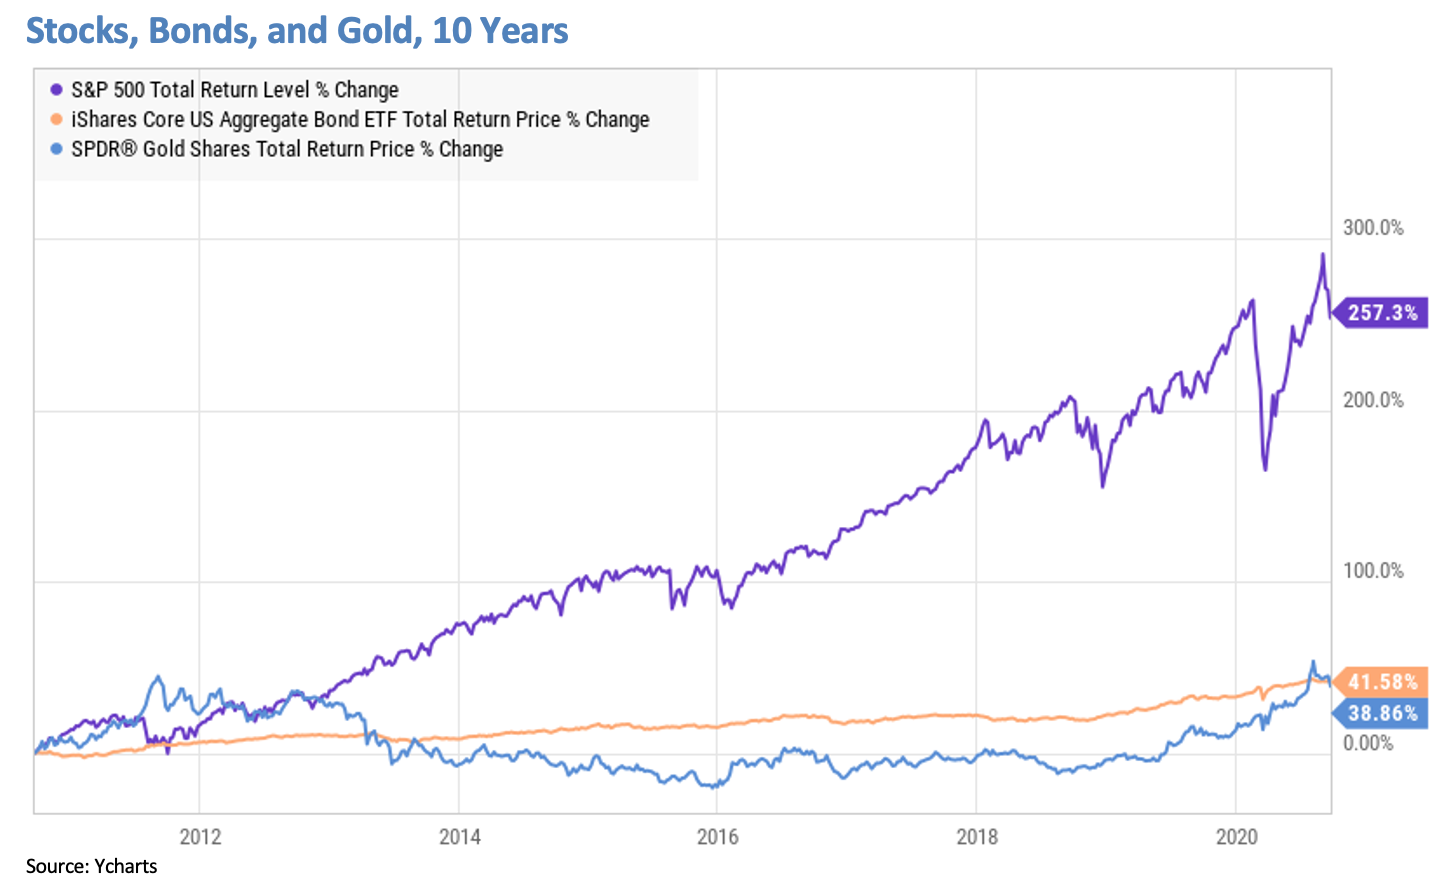 Stocks, Bonds and Gold 10Y